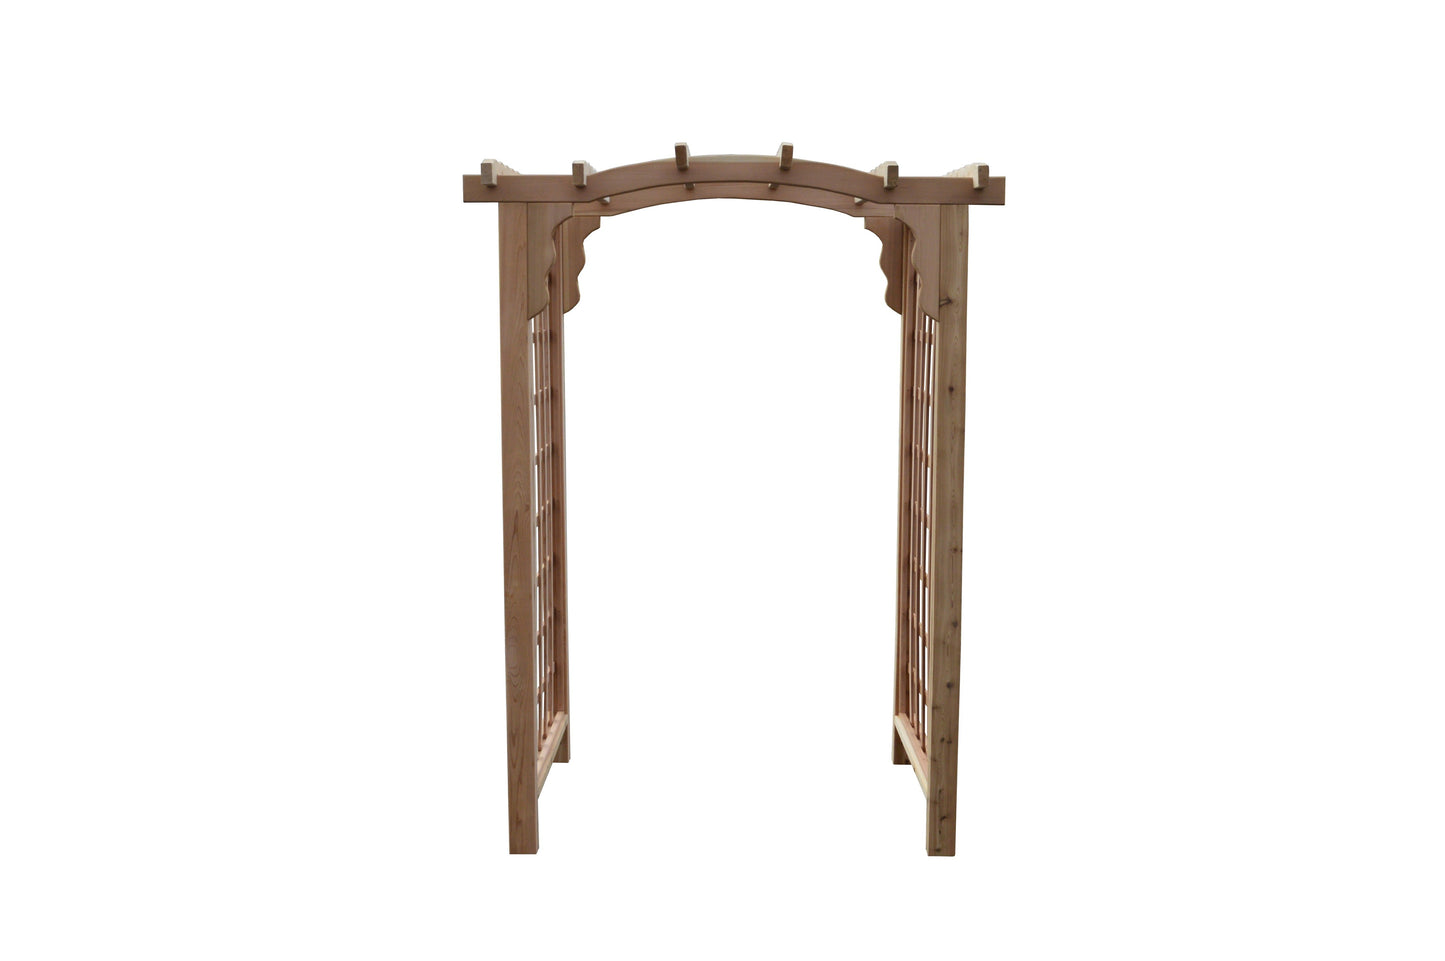 A&L Furniture Co. Western Red Cedar 5' Cambridge Arbor - LEAD TIME TO SHIP 2 WEEKS